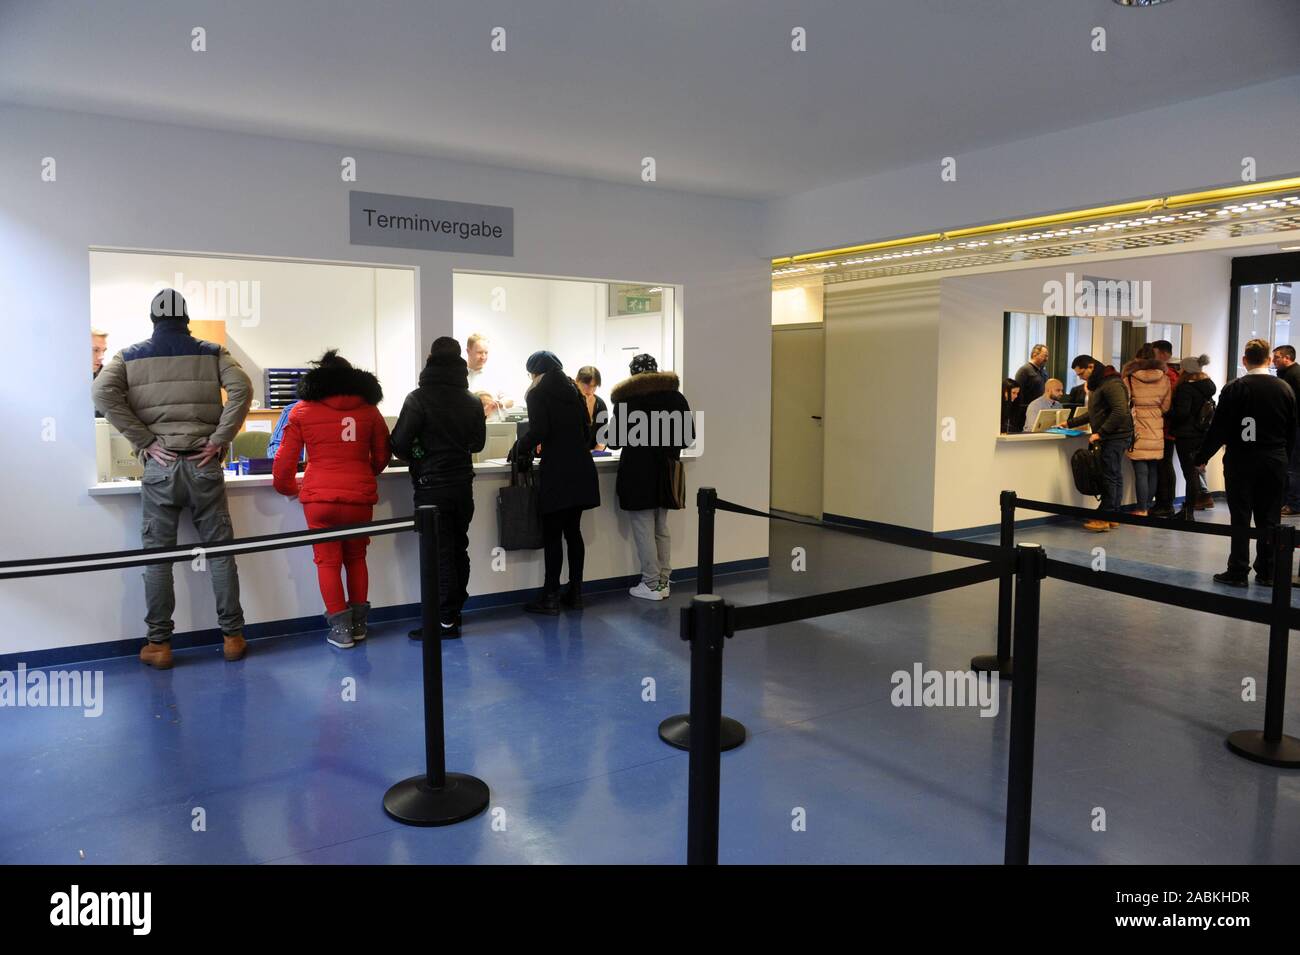 First day of the new online appointment procedure in the Munich district administration department (KVR). The newly designed waiting zone is divided into coloured areas (yellow, red, blue, green) which replace the old letter system. [automated translation] Stock Photo